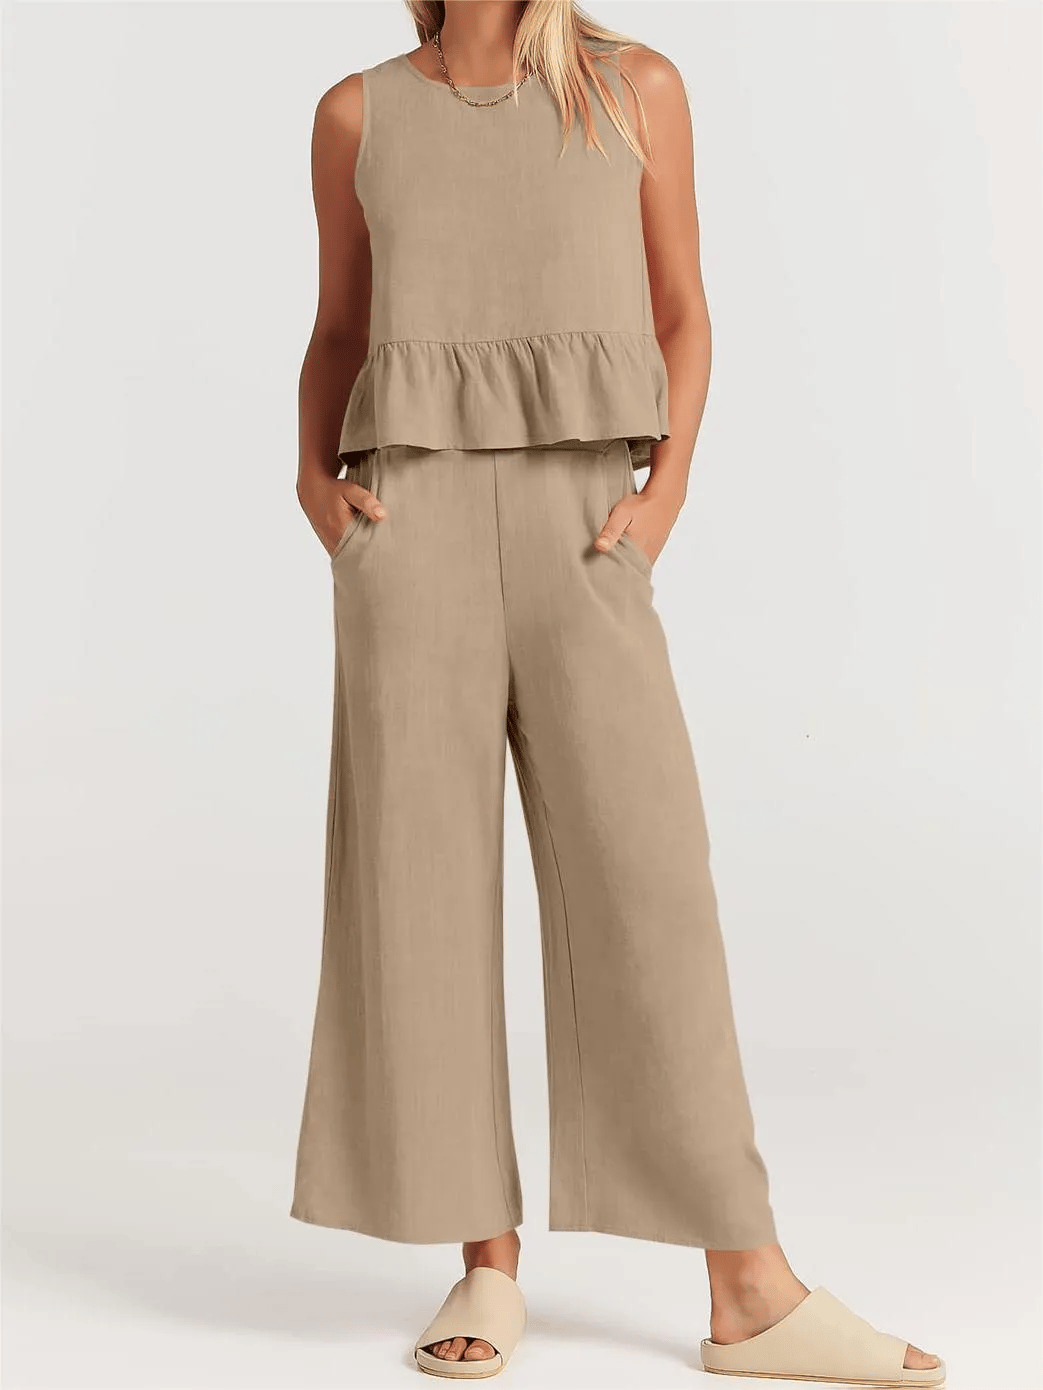 NTG Fad Khaki / S/UK6-8 WOMEN'S SUMMER 2 PIECES OUTFITS - LOUNGE SET WITH POCKETS